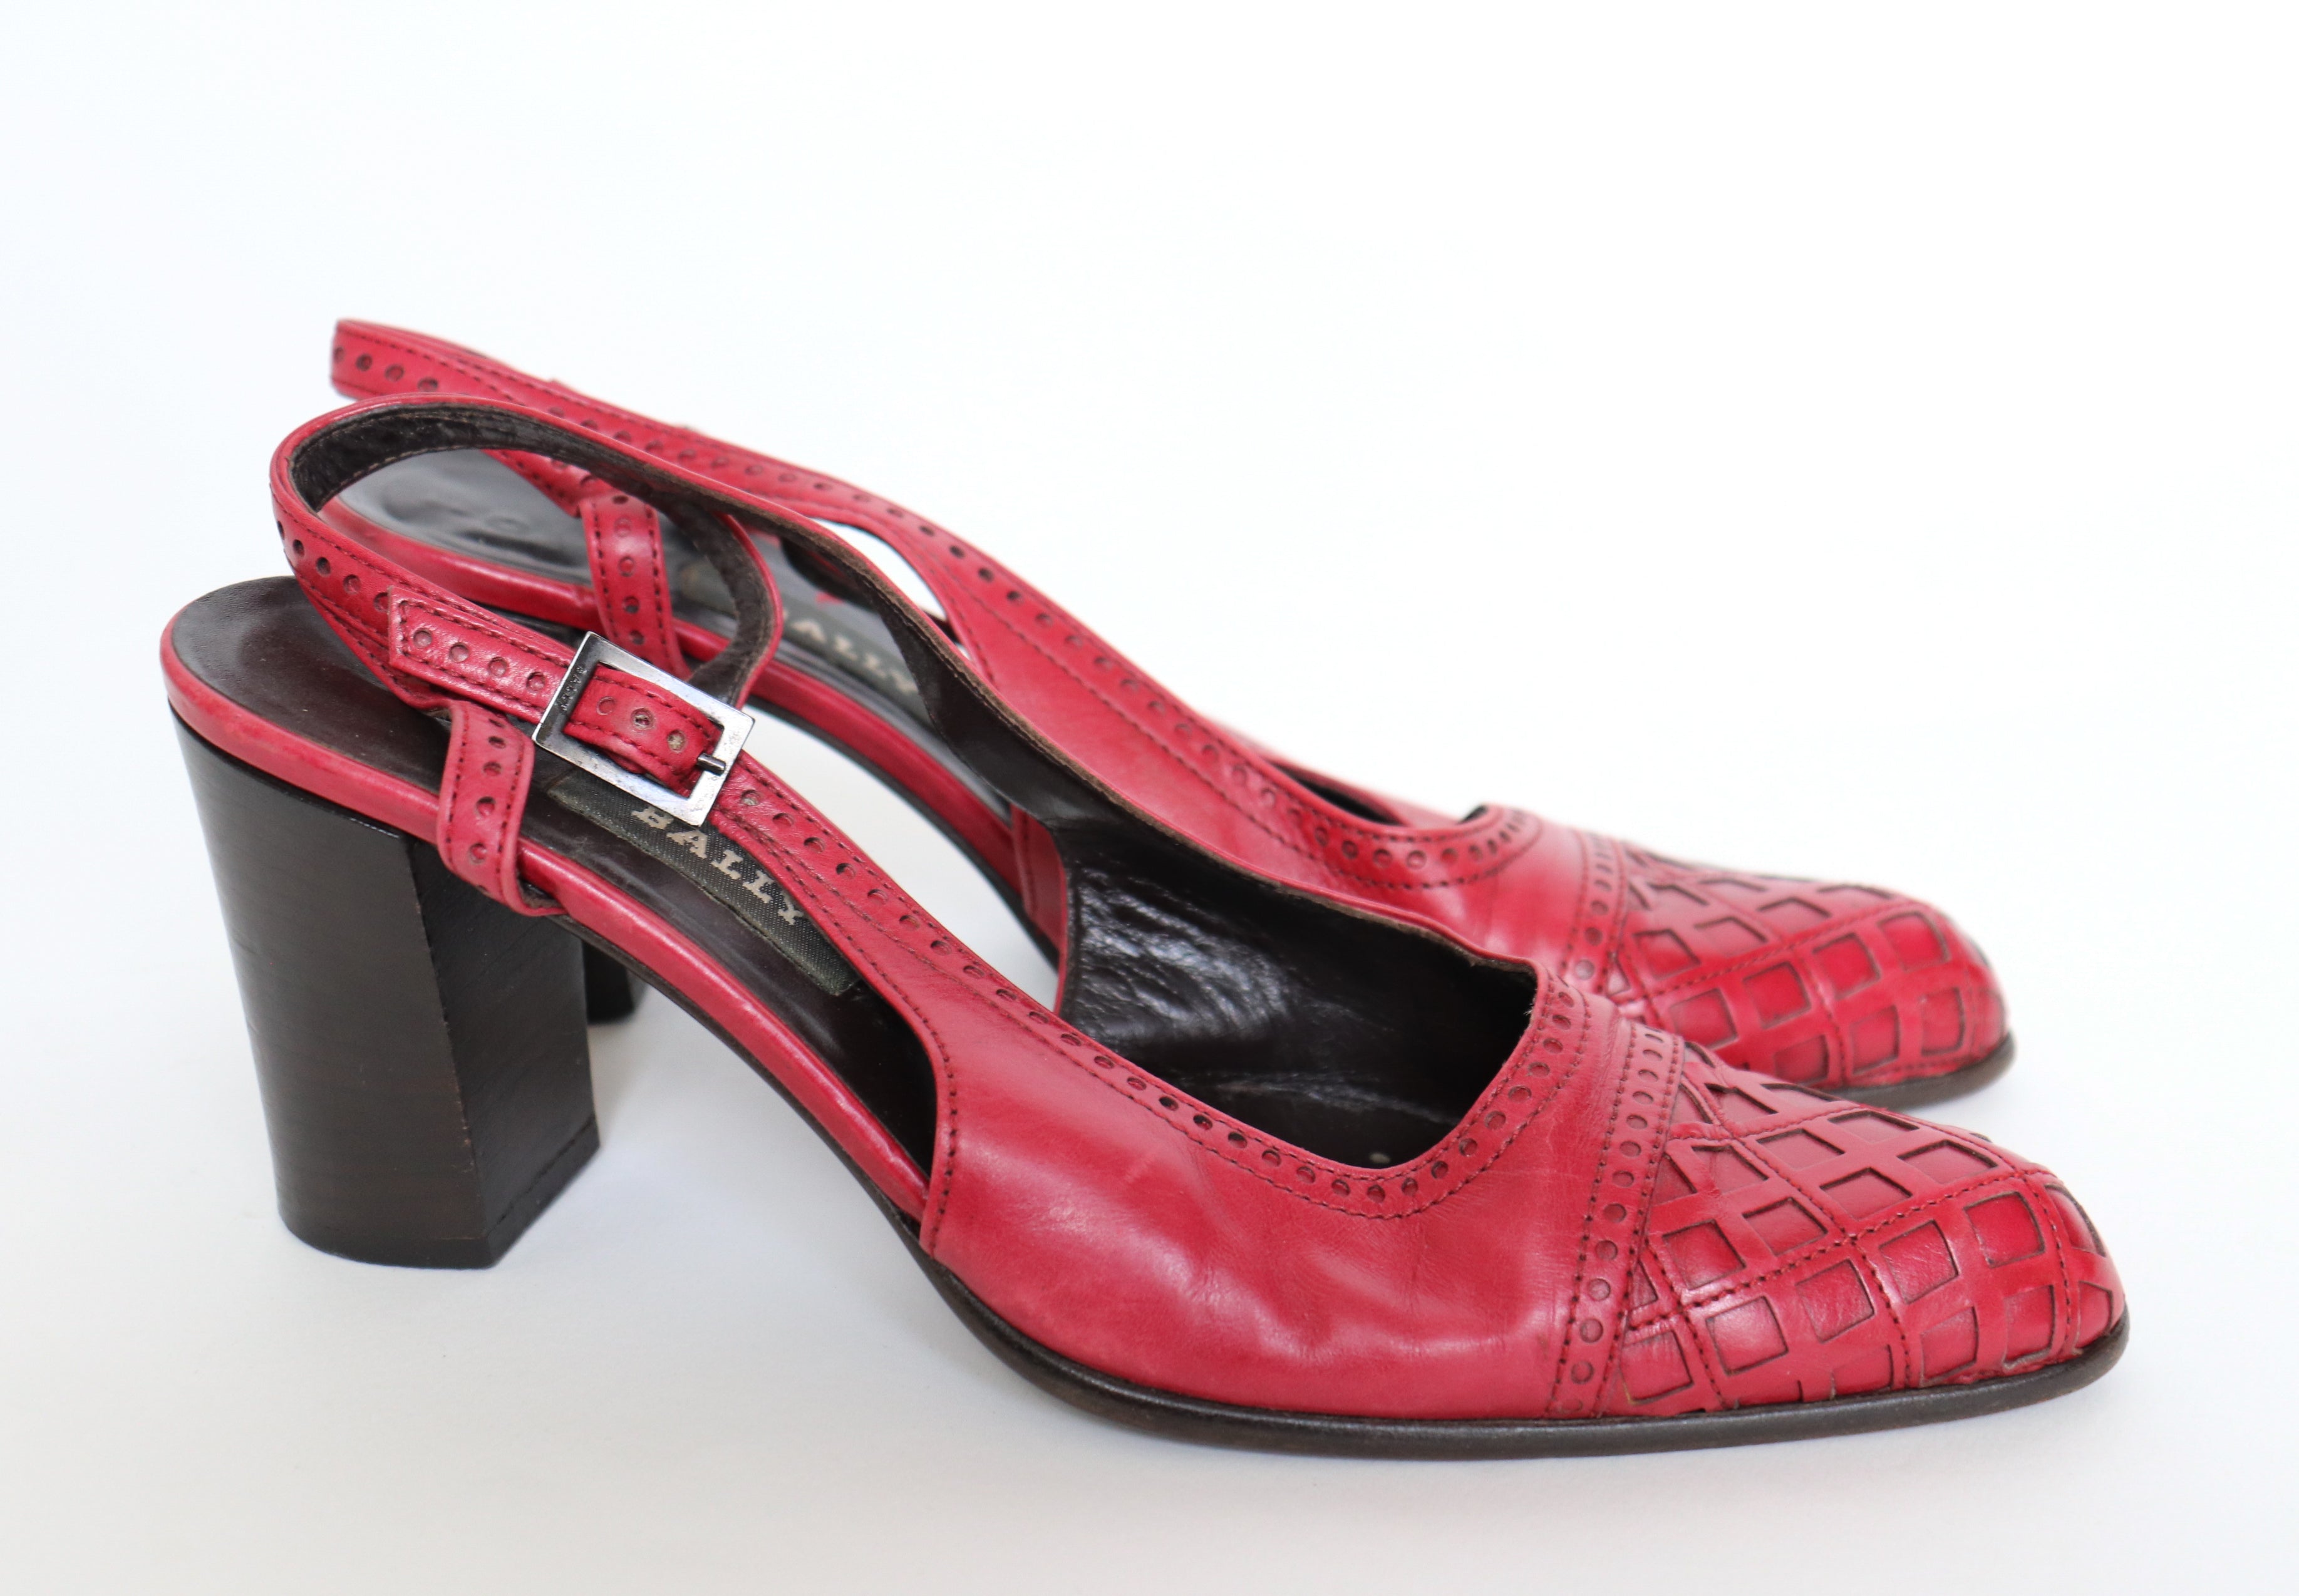 Bally Shoes - Red Leather Vintage Slingback - 1990s - UK 5 / 38